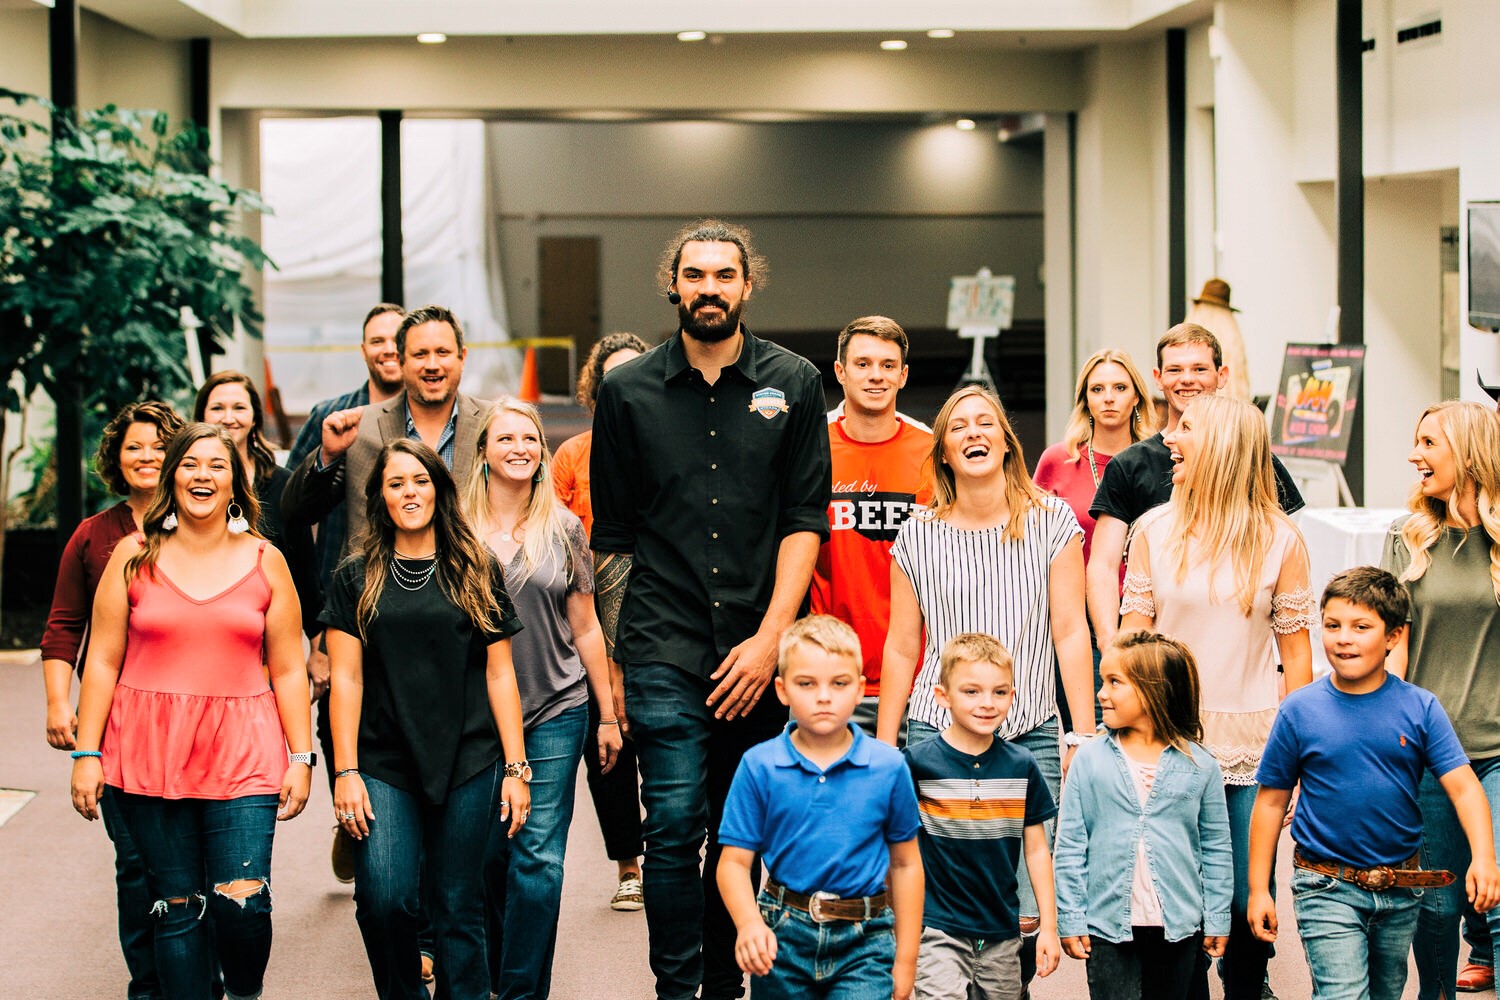 Oklahoma Beef Council Kicks Off Second Year of Partnership with Steven Adams with the Academy of Smashing Steaks Promotion